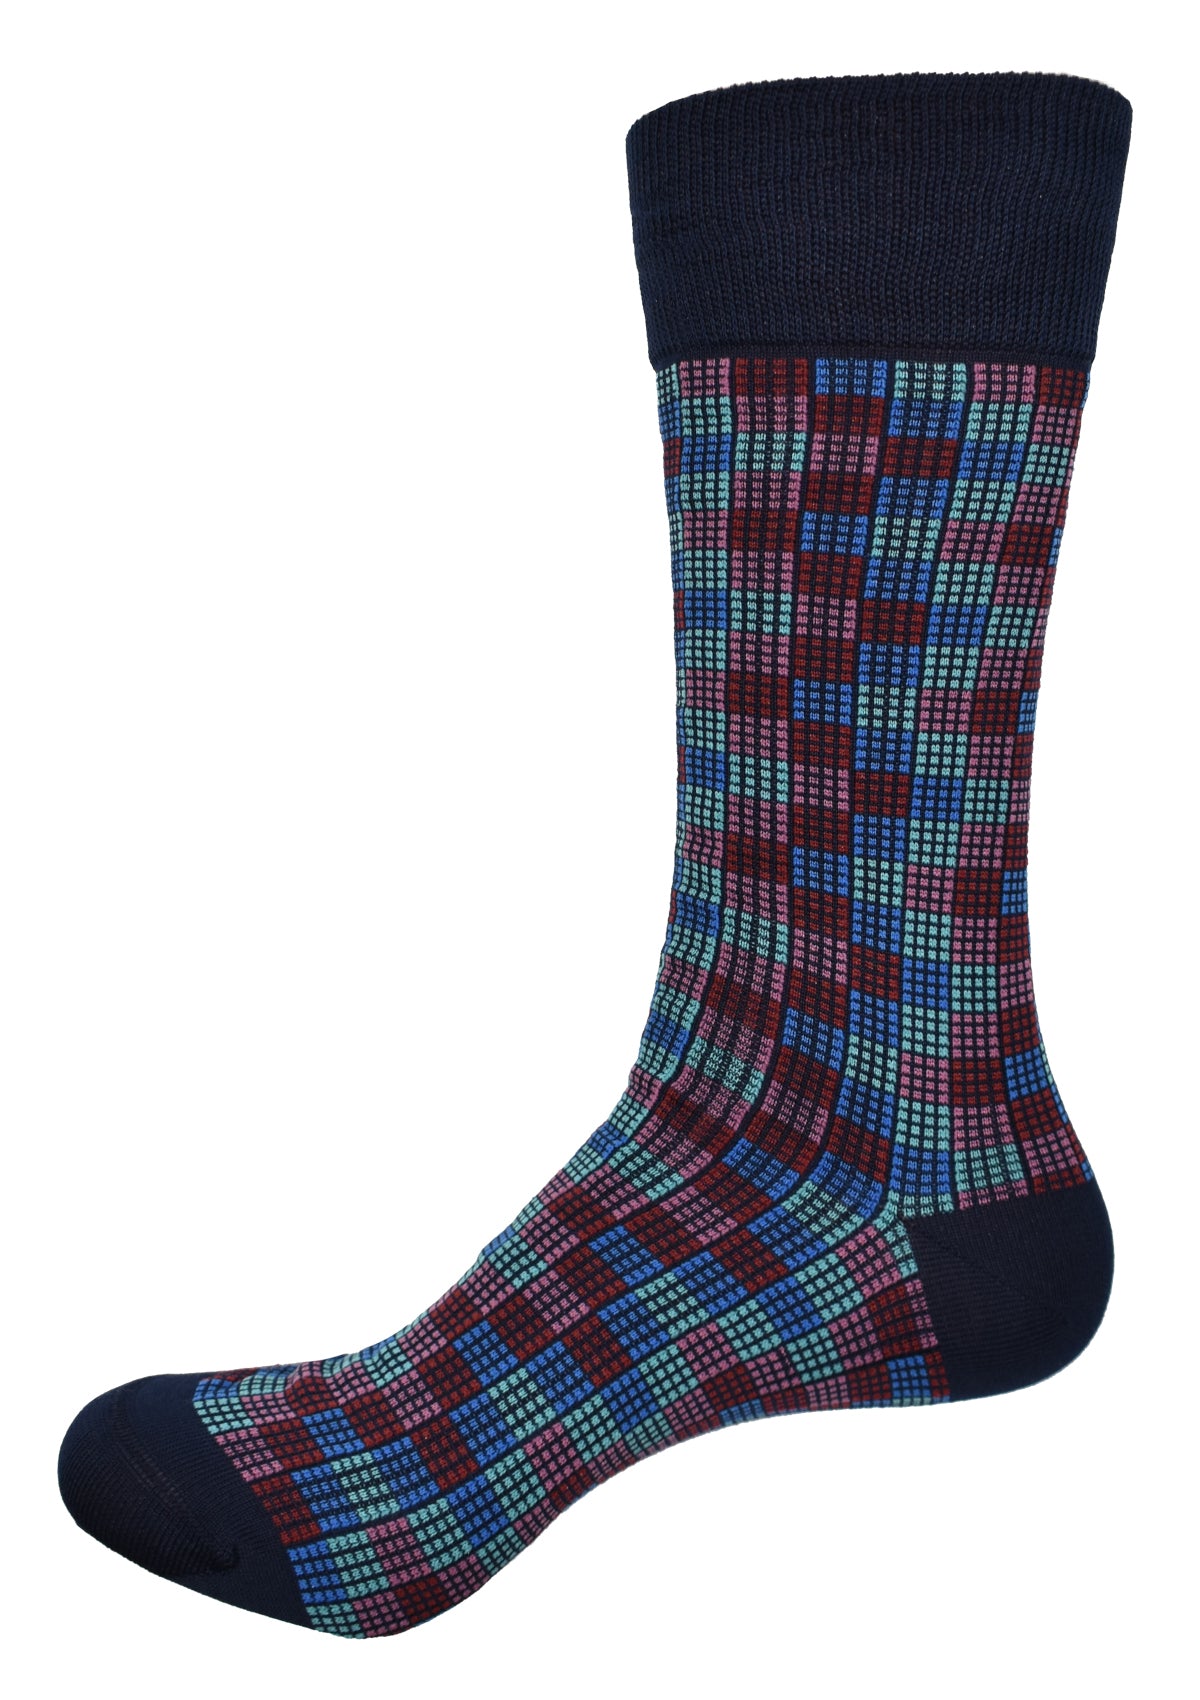 Introducing the ZV1556R - a red blue toned multi checkerboard crafted from rich mercerized cotton and enhanced with lycra for remarkable comfort and stretch. Unwind in style with this outstanding geometric pattern and sharp red blue teal tones!  Also available in Brown or Navy  Fits size 9-11.